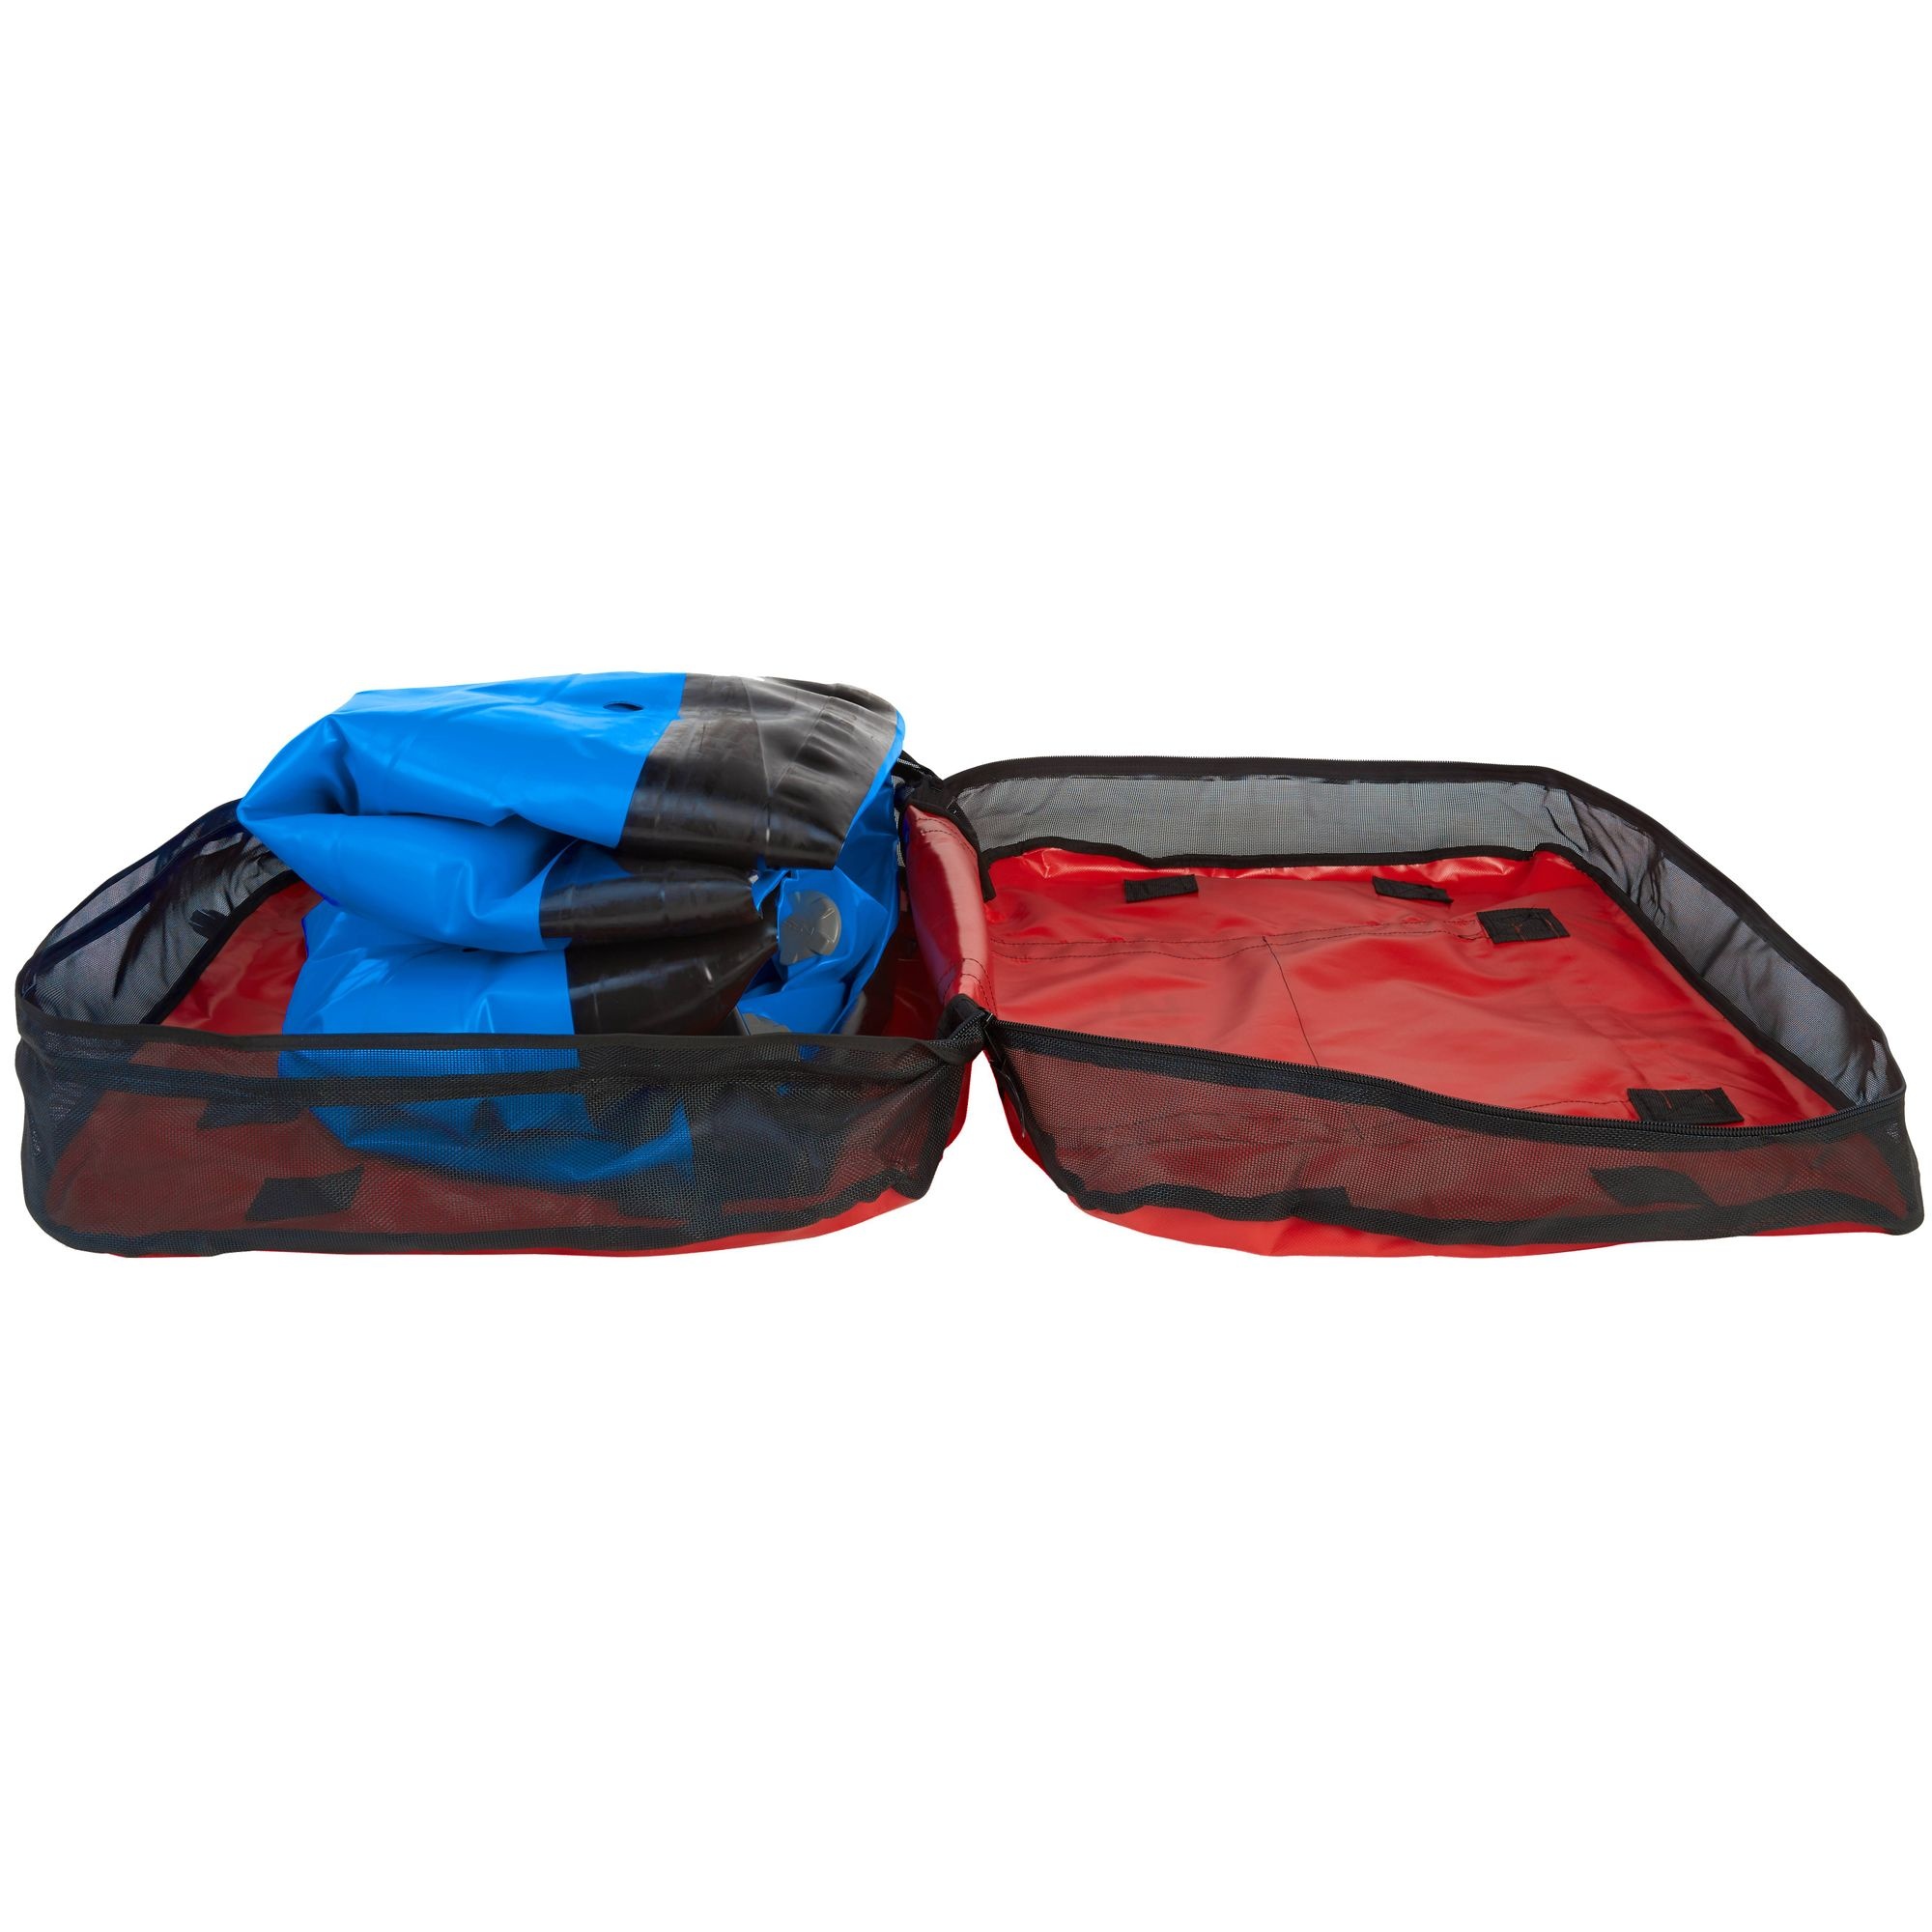 NRS NRS Boat Bag for Rafts and IK's